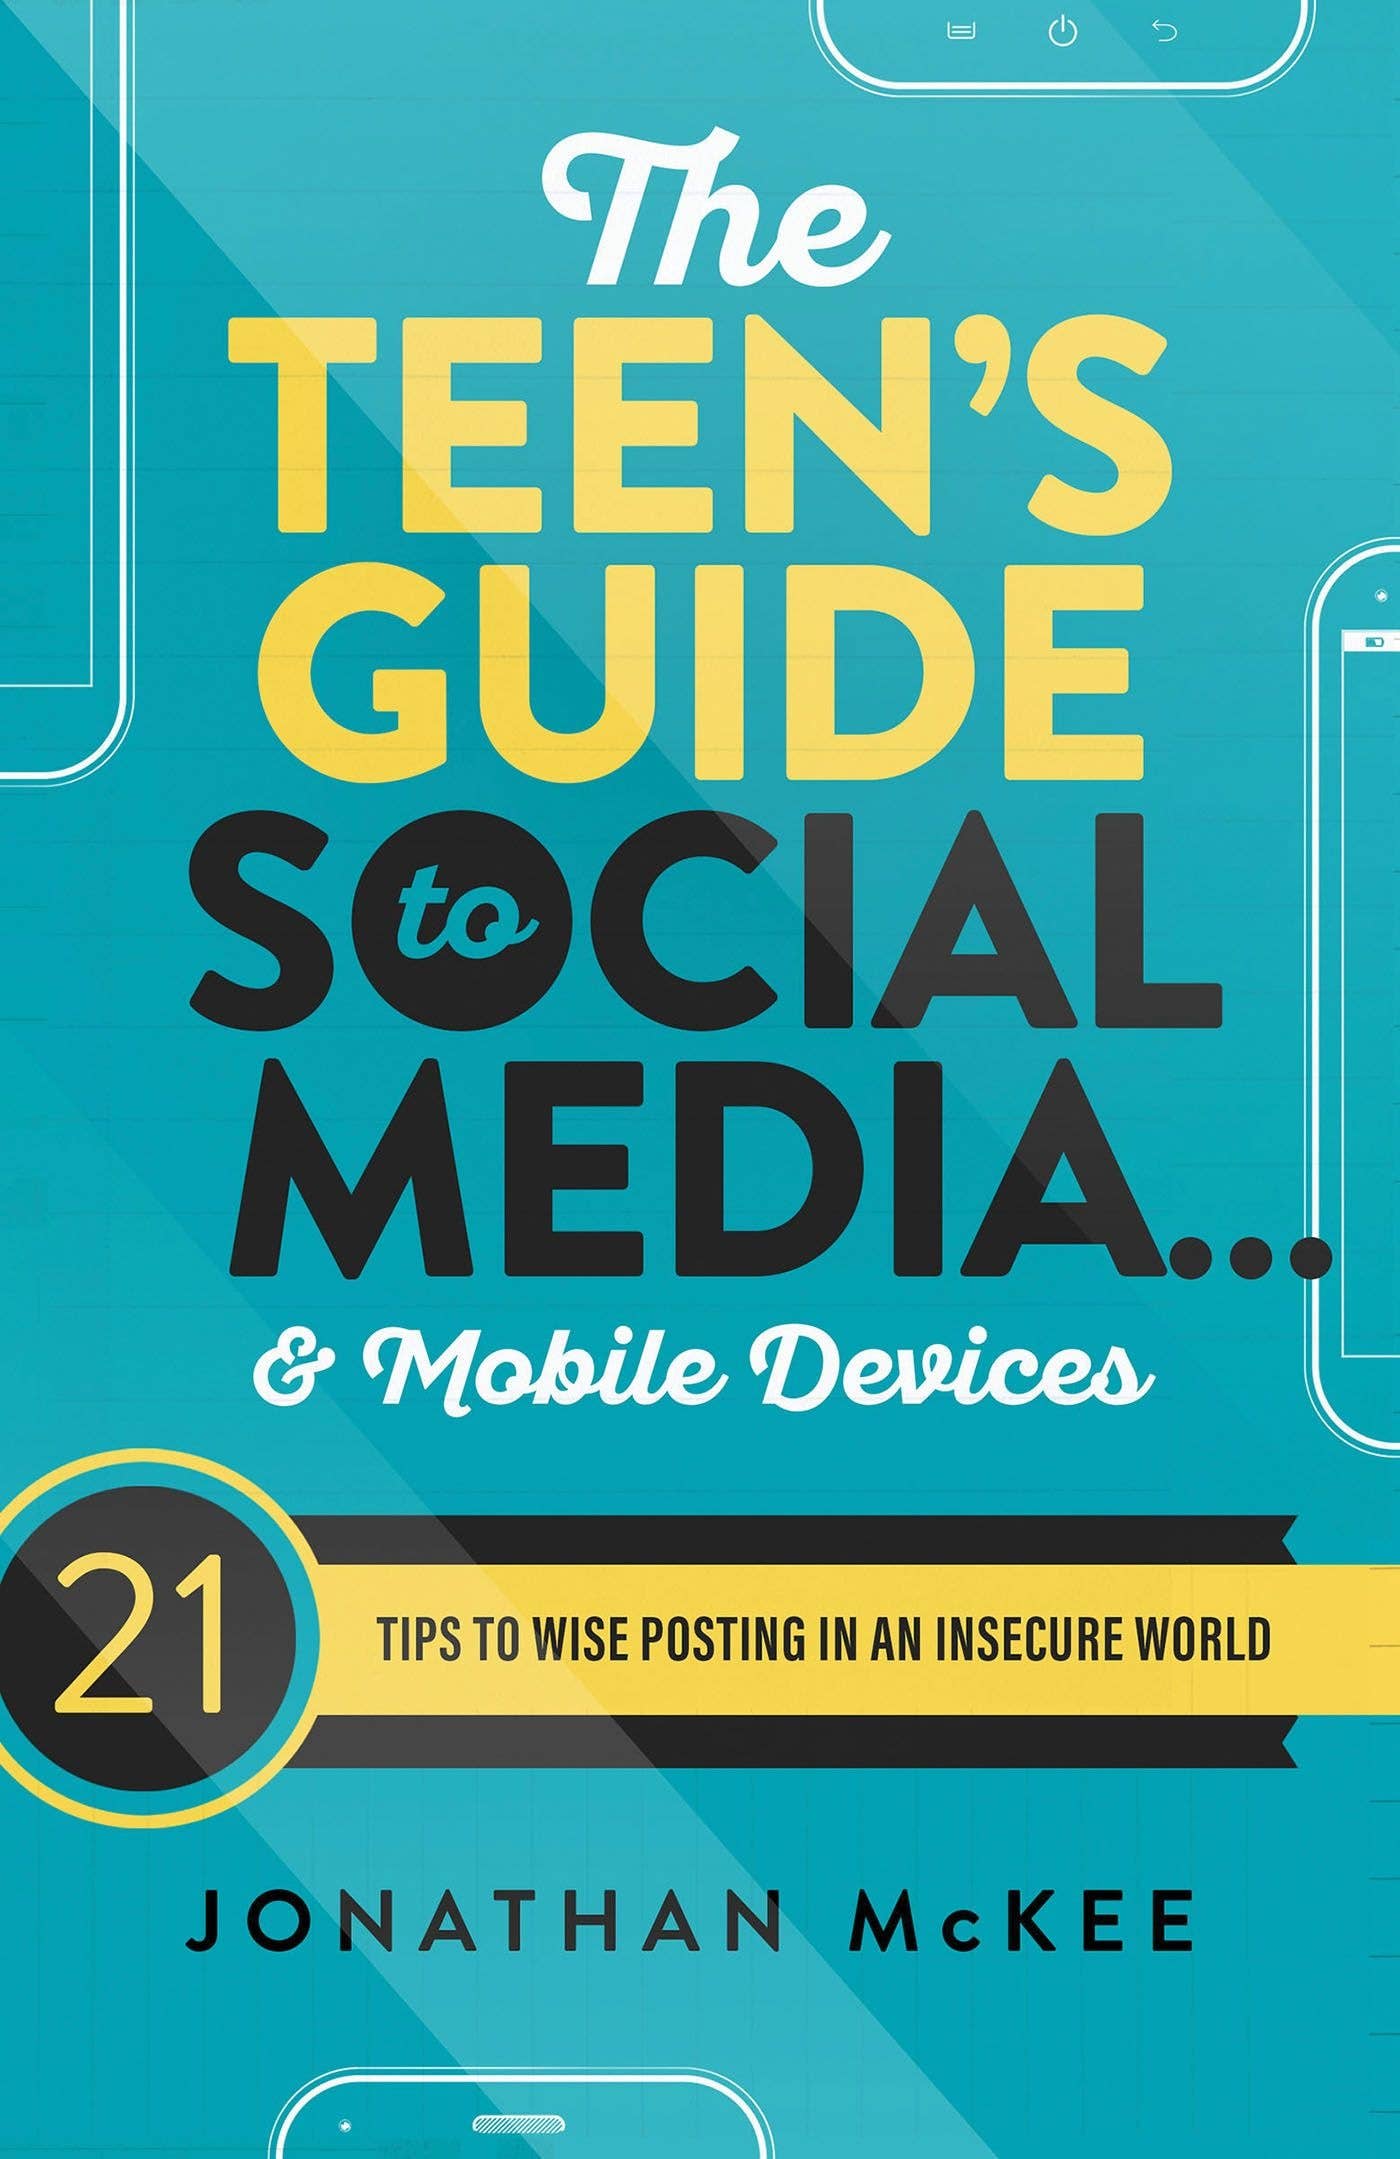 The Teen's Guide to Social Media And Mobile Devices